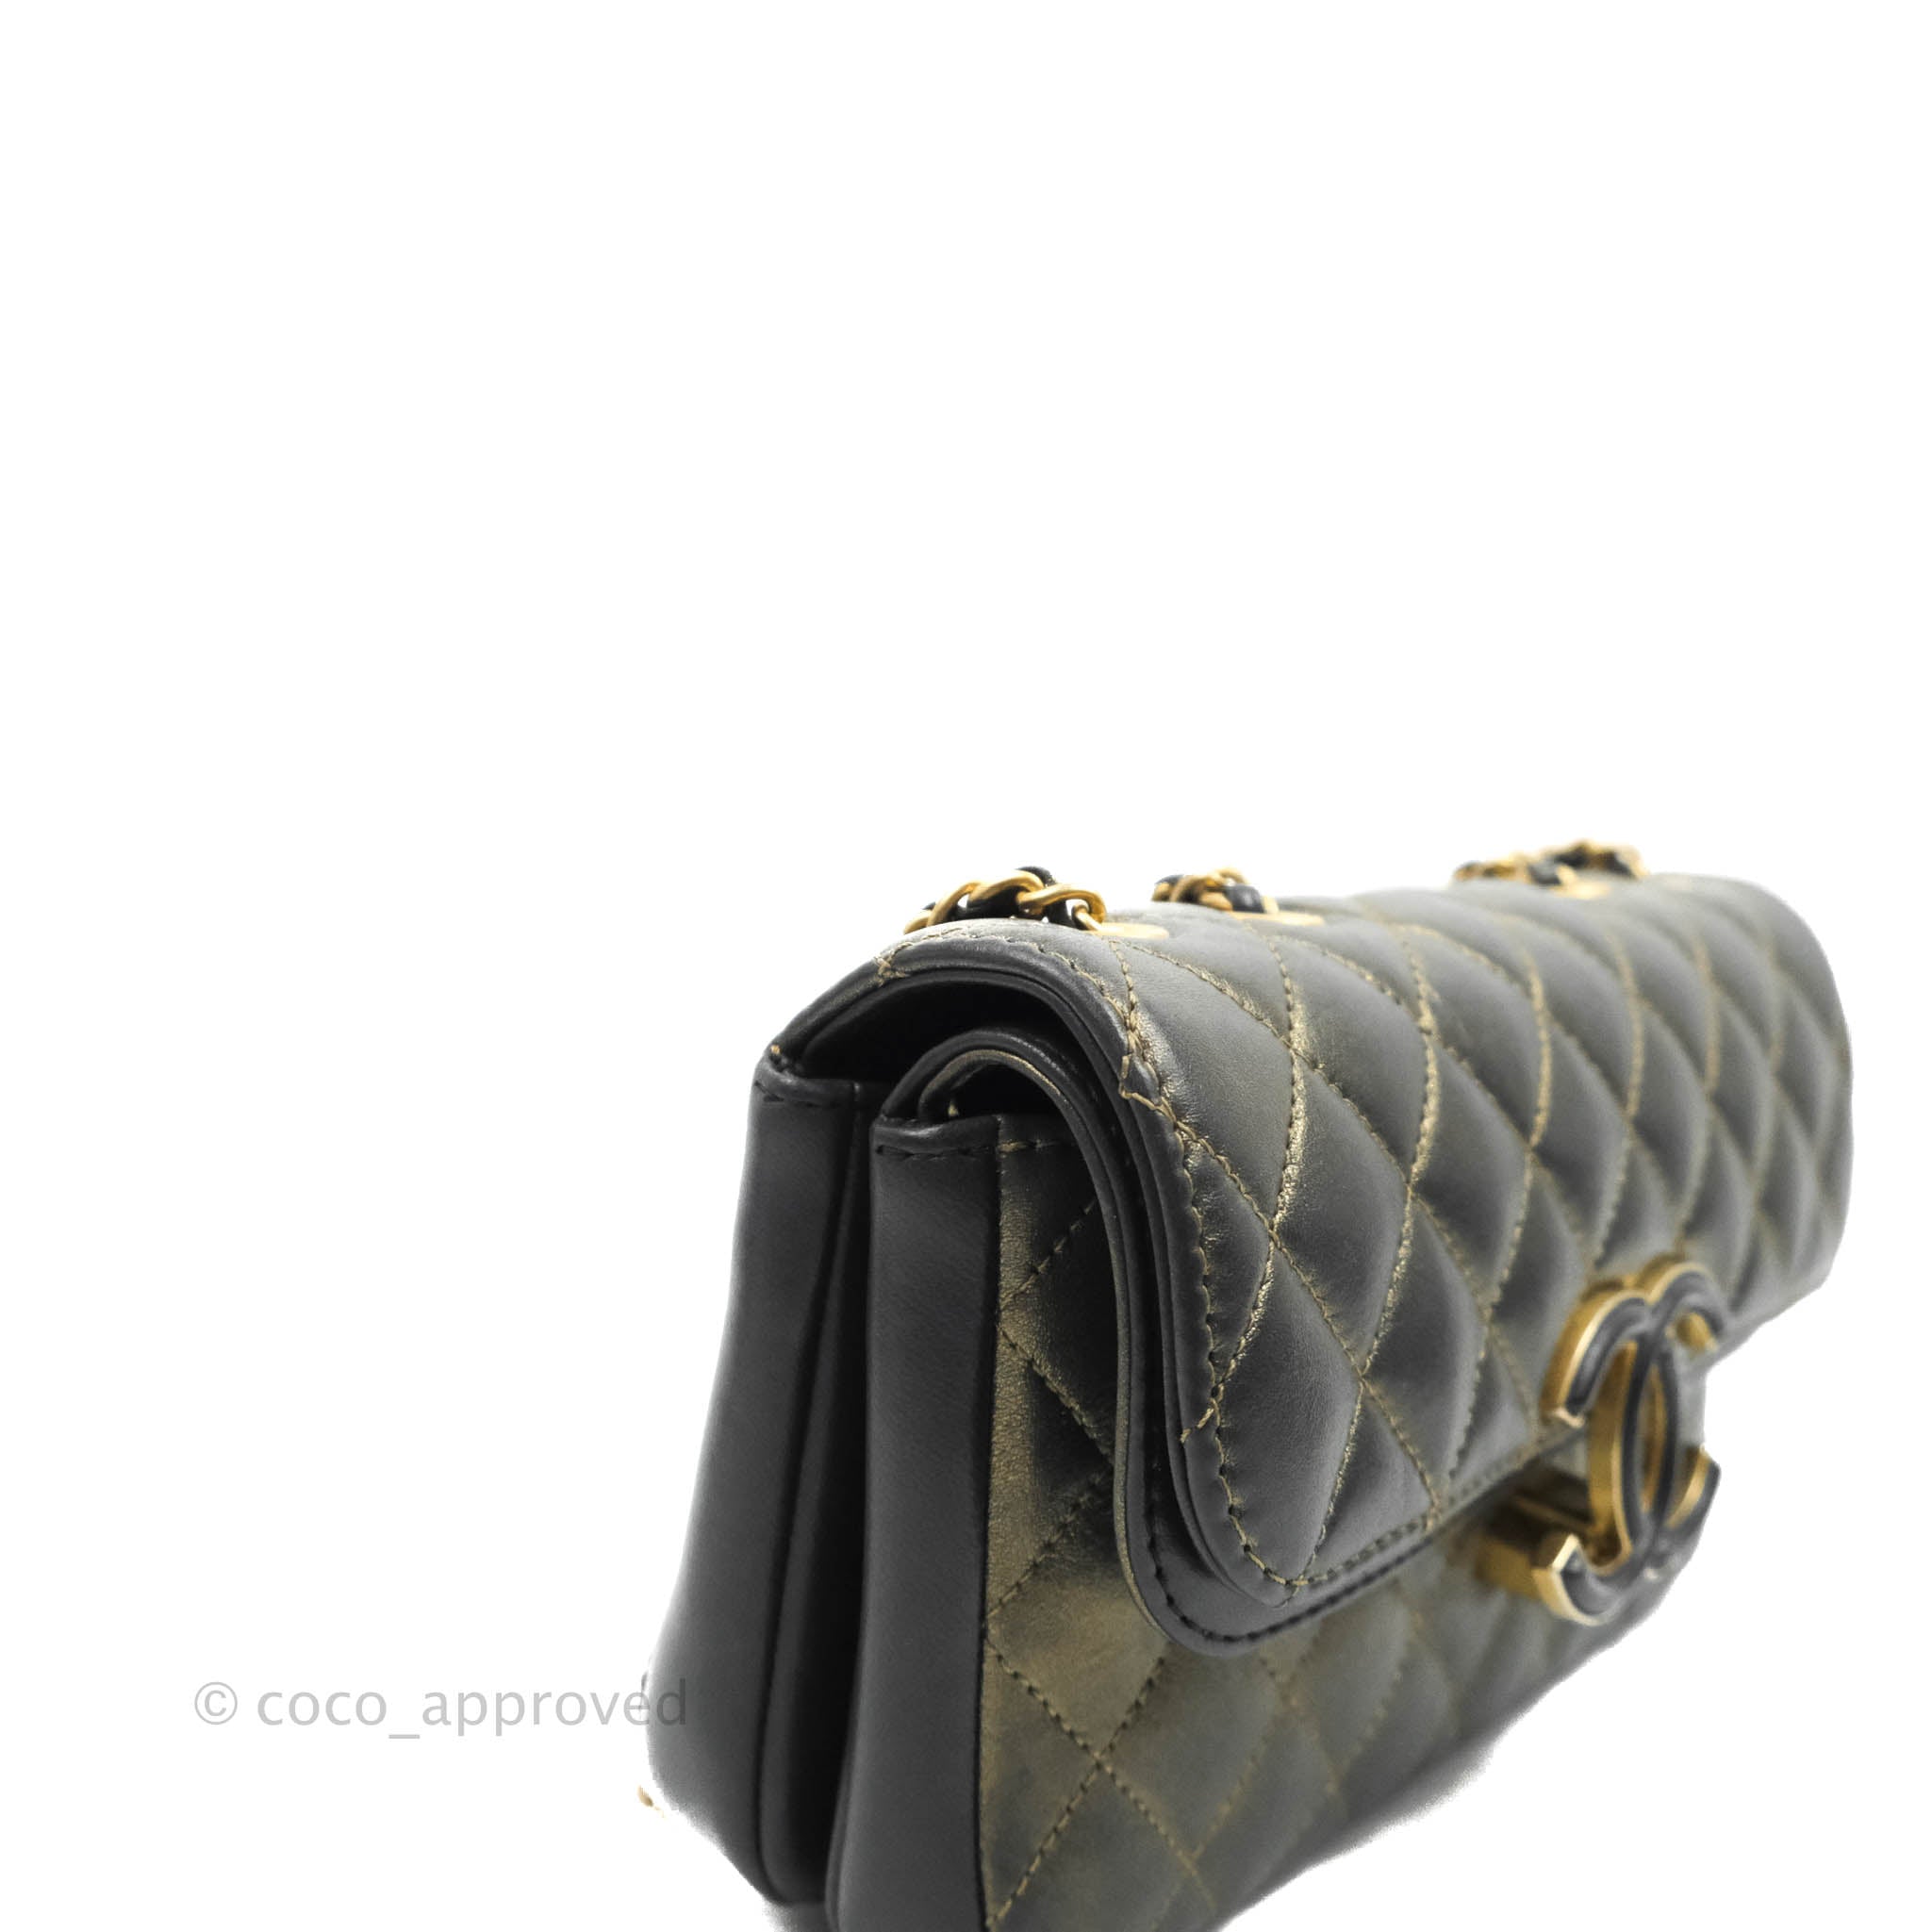 Chanel Small Enamel CC Flap Bag Quilted Iridescent Grey Lambskin